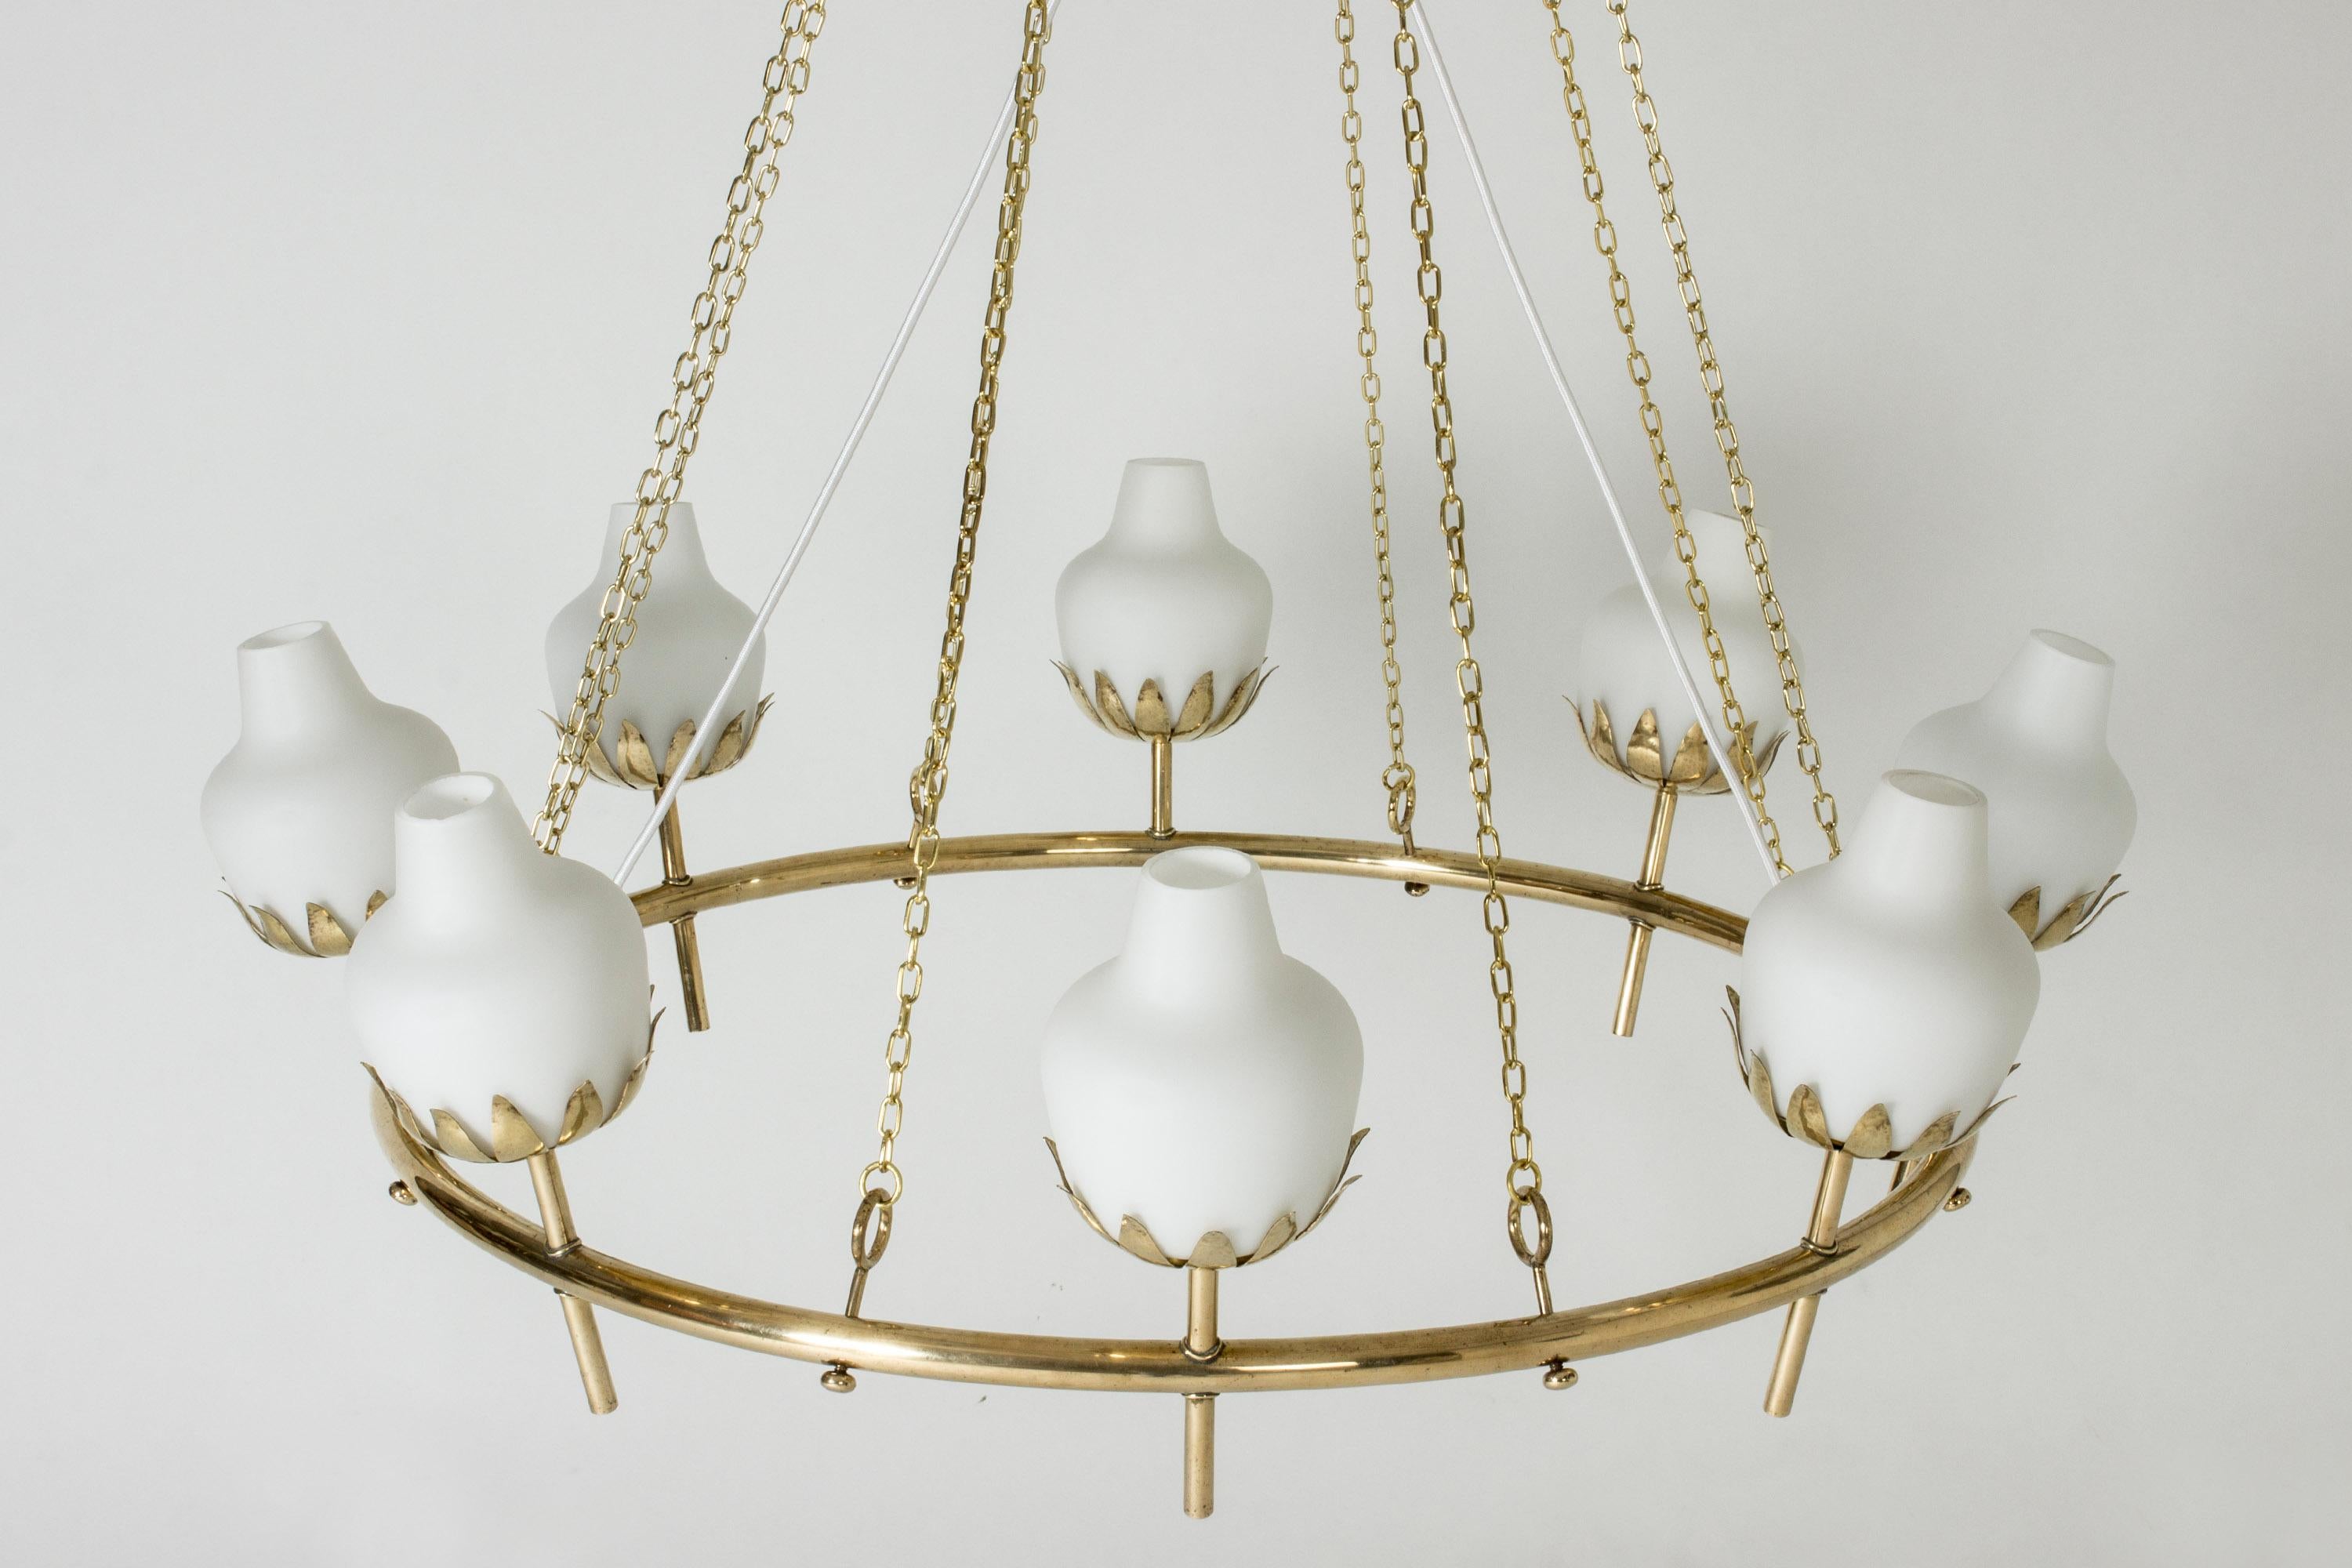 Stunning chandelier by Hans Bergström, made from a wide brass ring with eight lights. Opaline shades nestled in leaf holders with a hammered surface. Chains suspend the chandelier, the electrical cord runs elegantly through the middle. Decorative